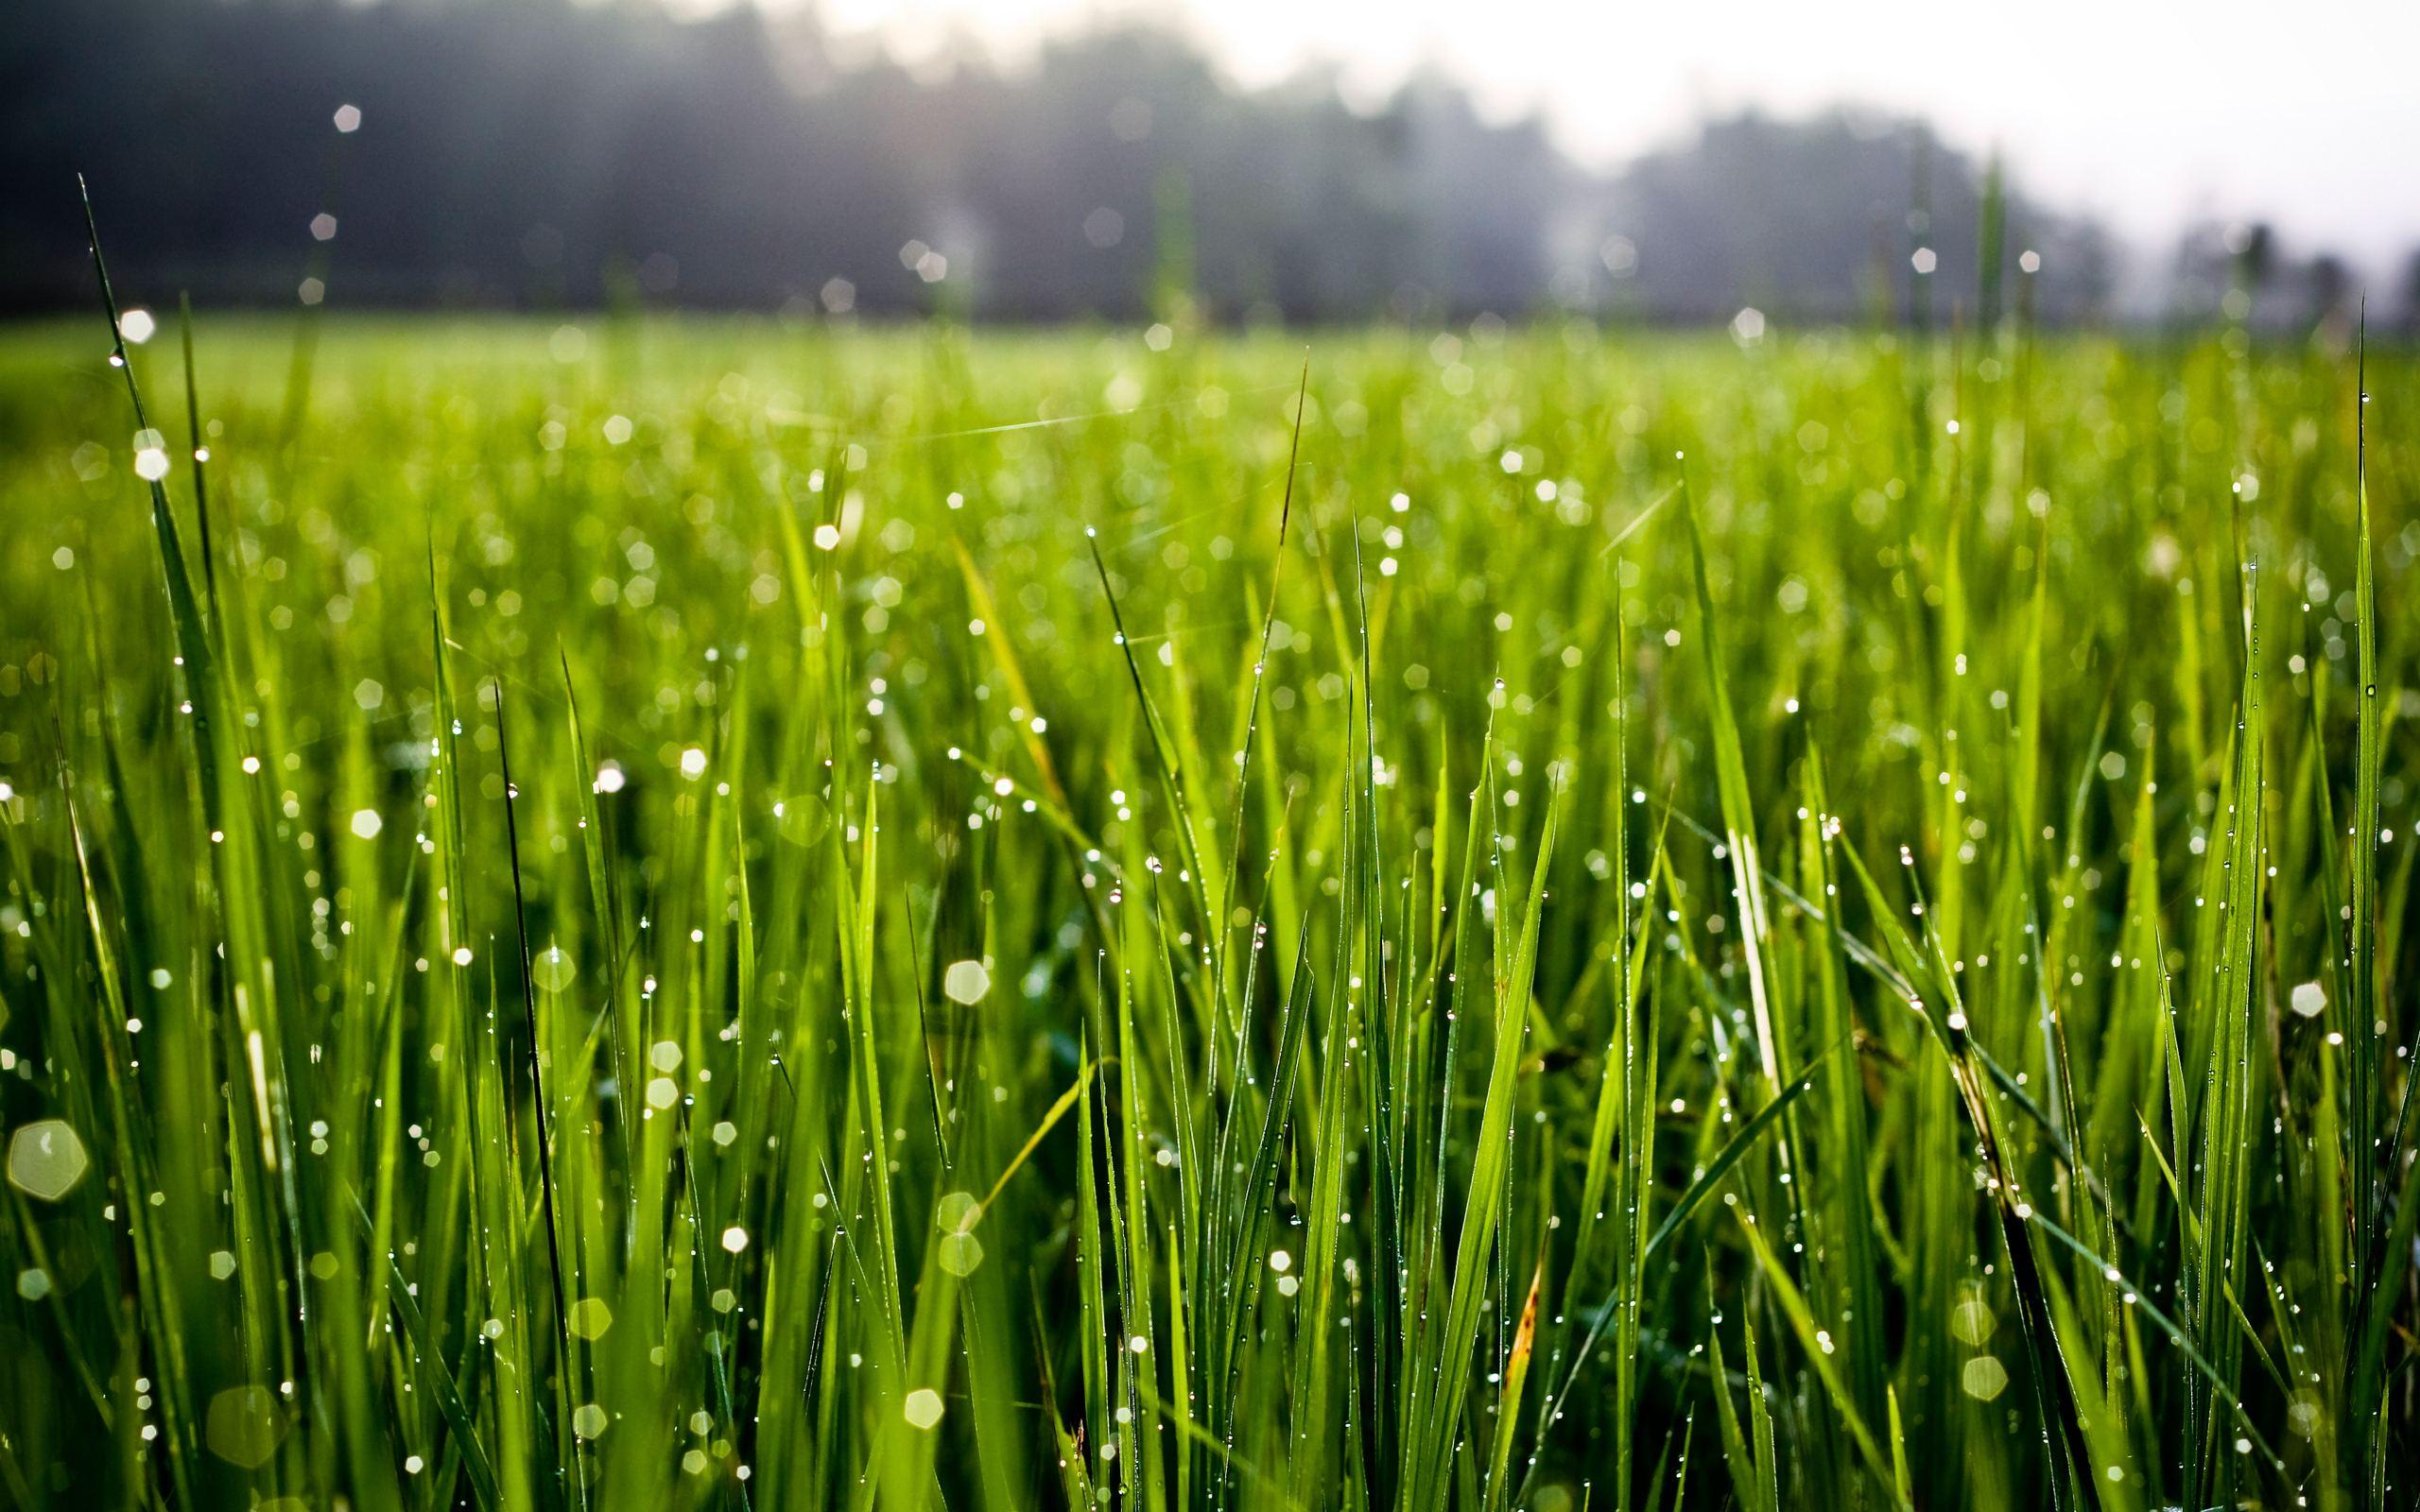 morning dew drops on grass